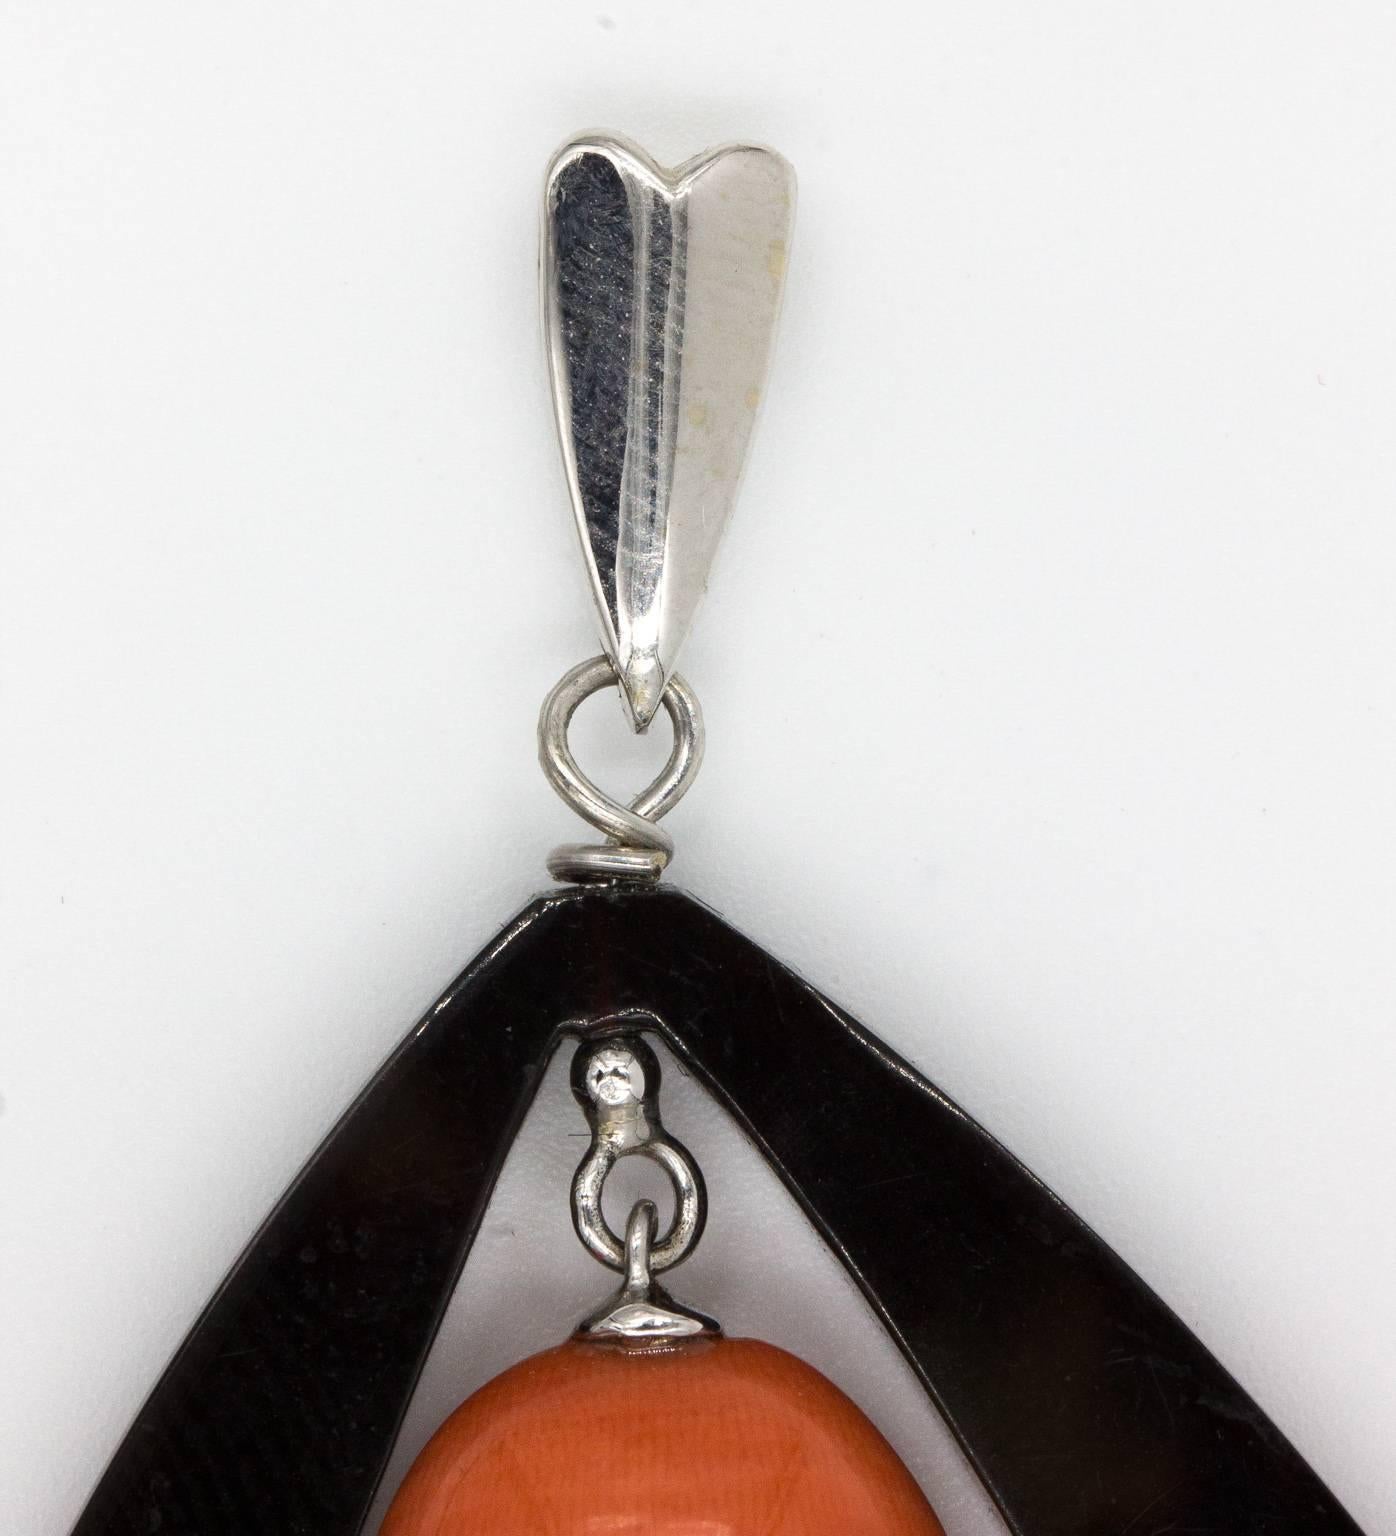 Large pendant made up of a brown Lucite frame and a suspended natural and undyed piece of coral. The coral measures 7/8 inches long and is nearly 5/8 inches wide and 7.5 mm thick. The overall pendant is 2 1/4 inches and 6.8 grams in weight. The